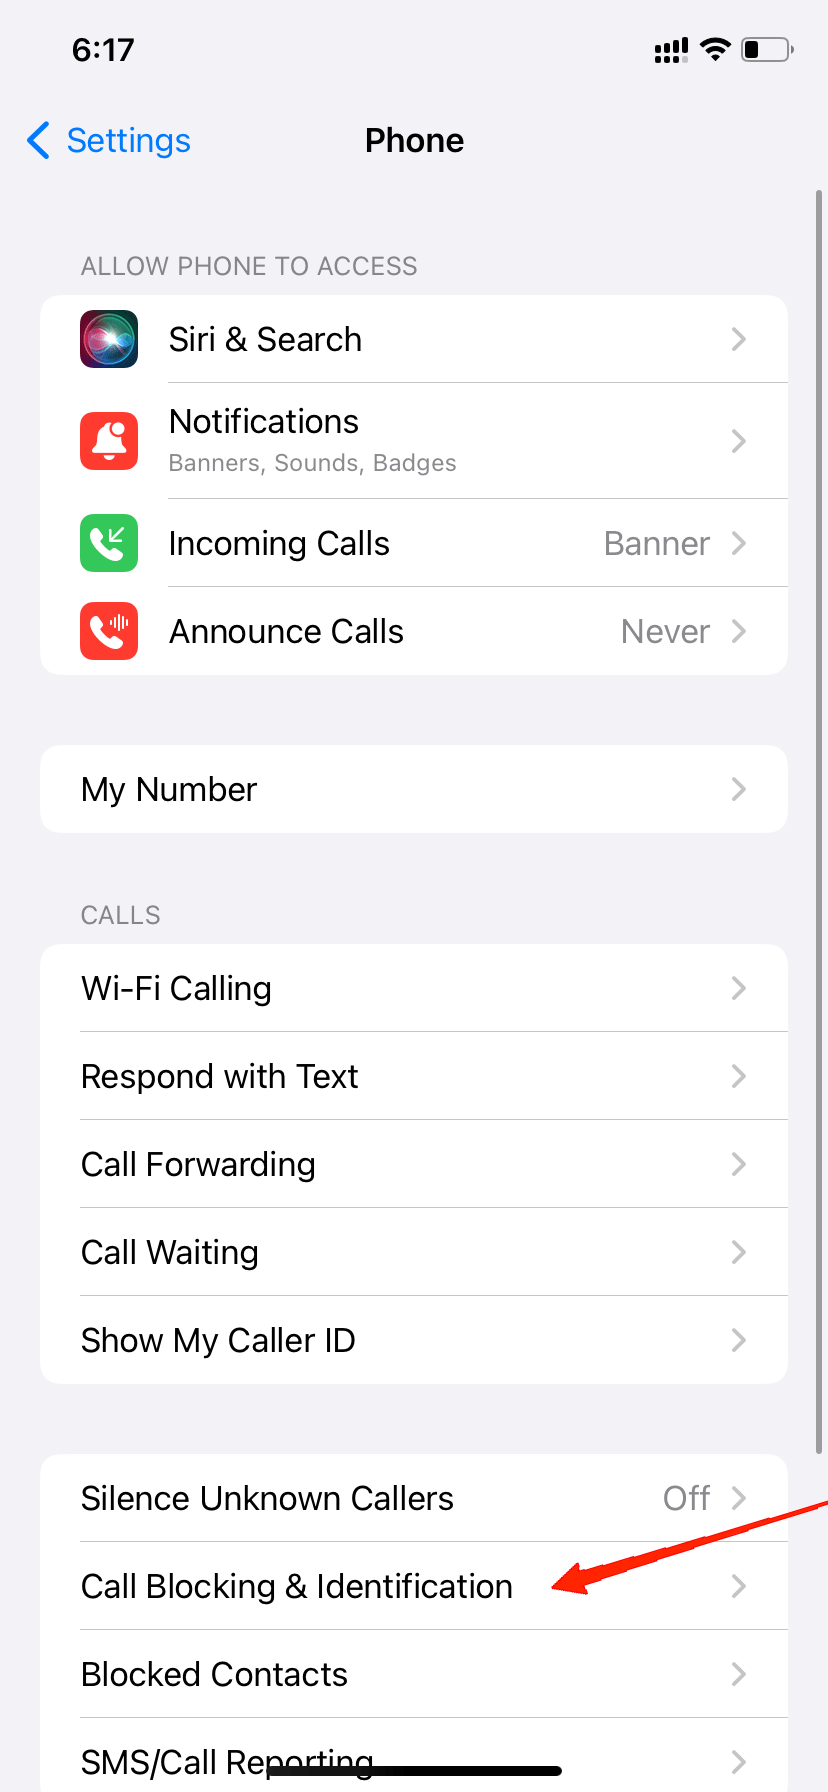 Scroll down to the call blocking and identification section.